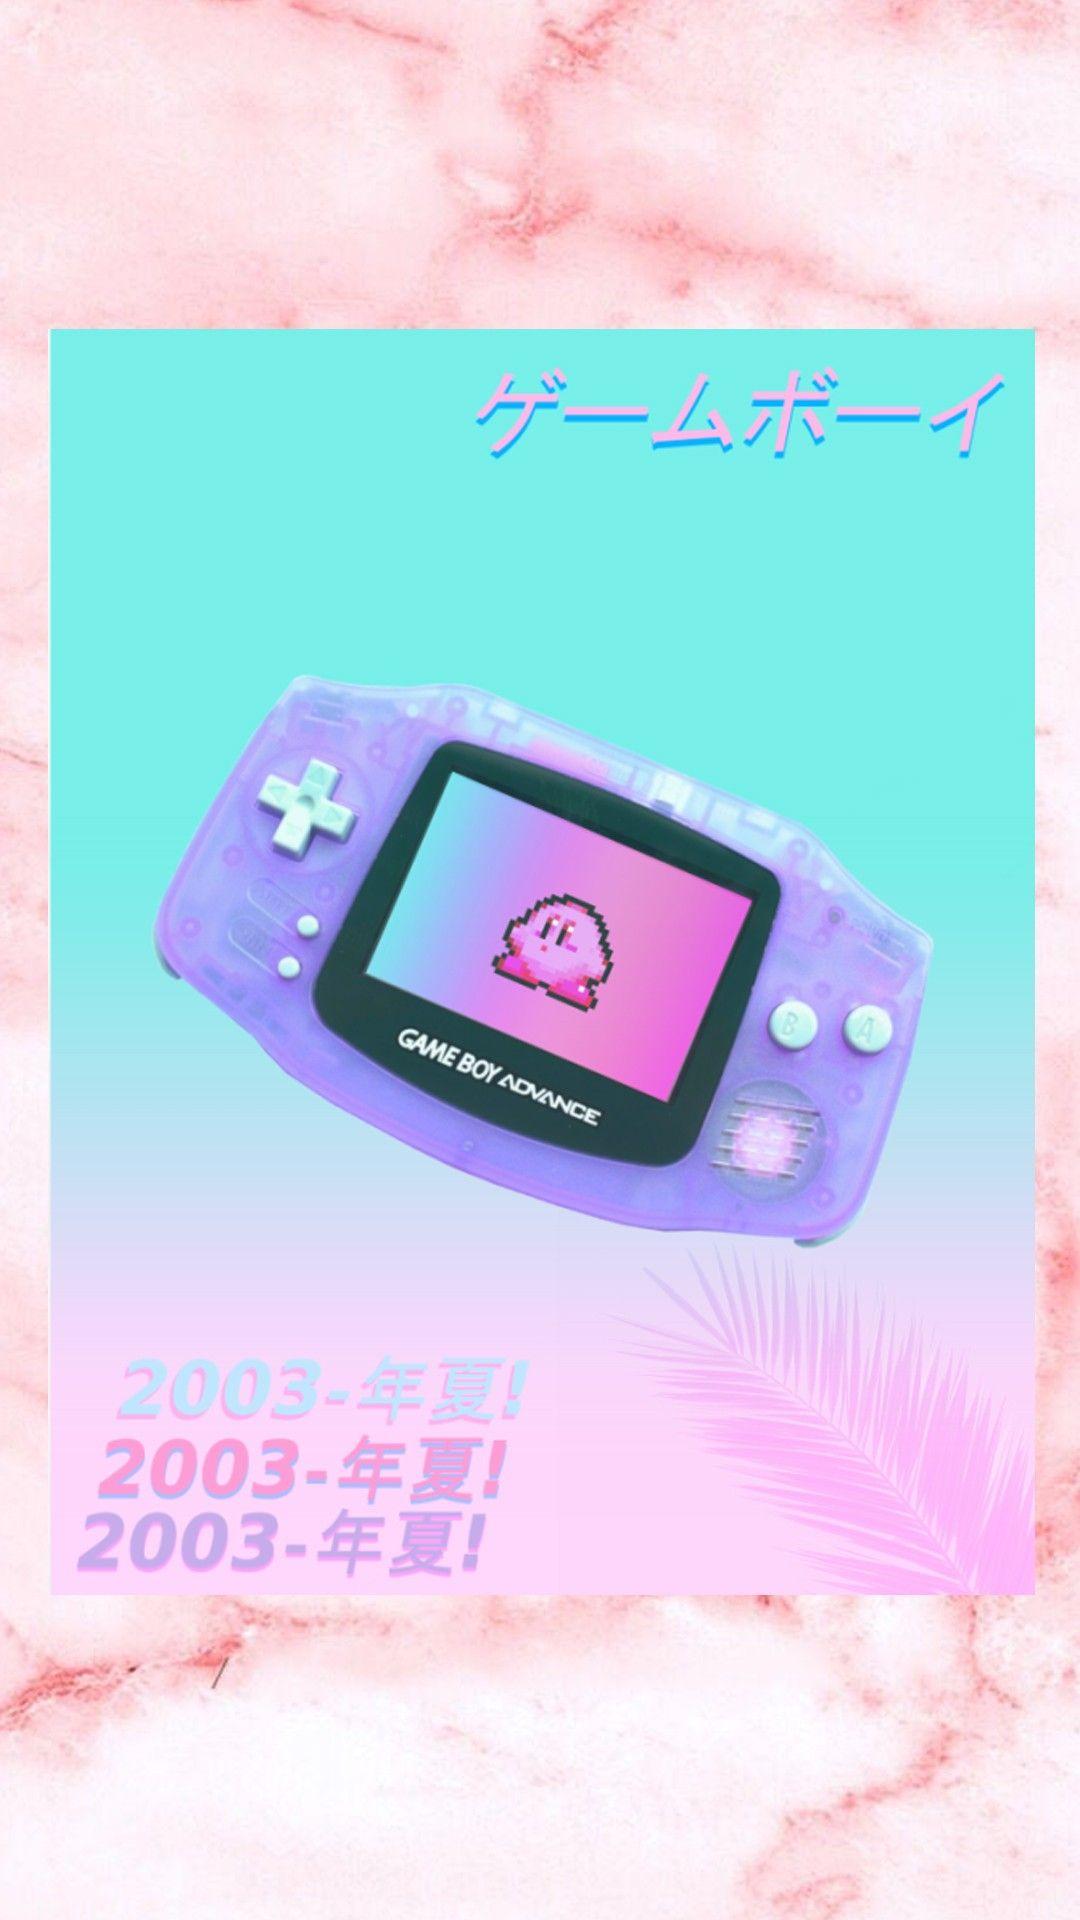 Aesthetic background with a Game Boy Advance. - Game Boy